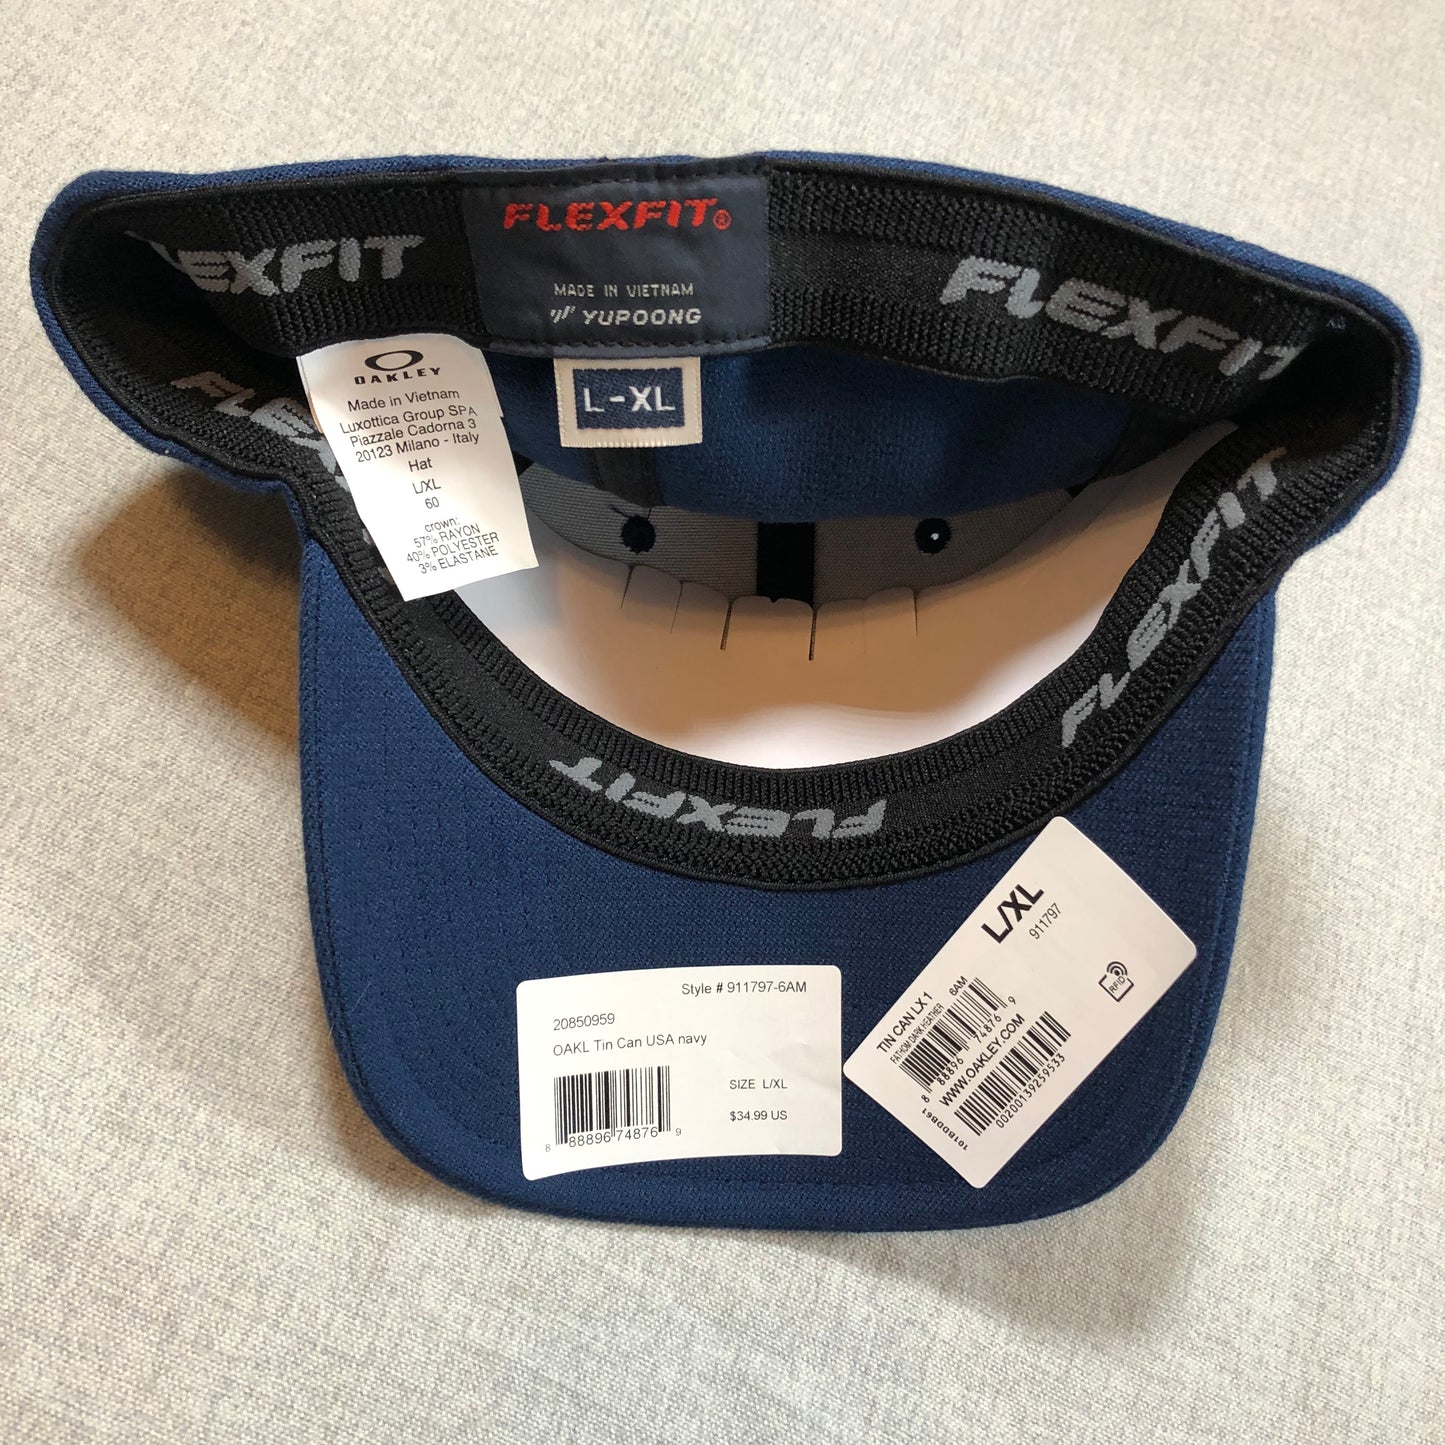 OAKLEY Hat Classic Flex Fit Fitted Stretch Hat L/XL Blue USA American Flag Logo NEW with tags